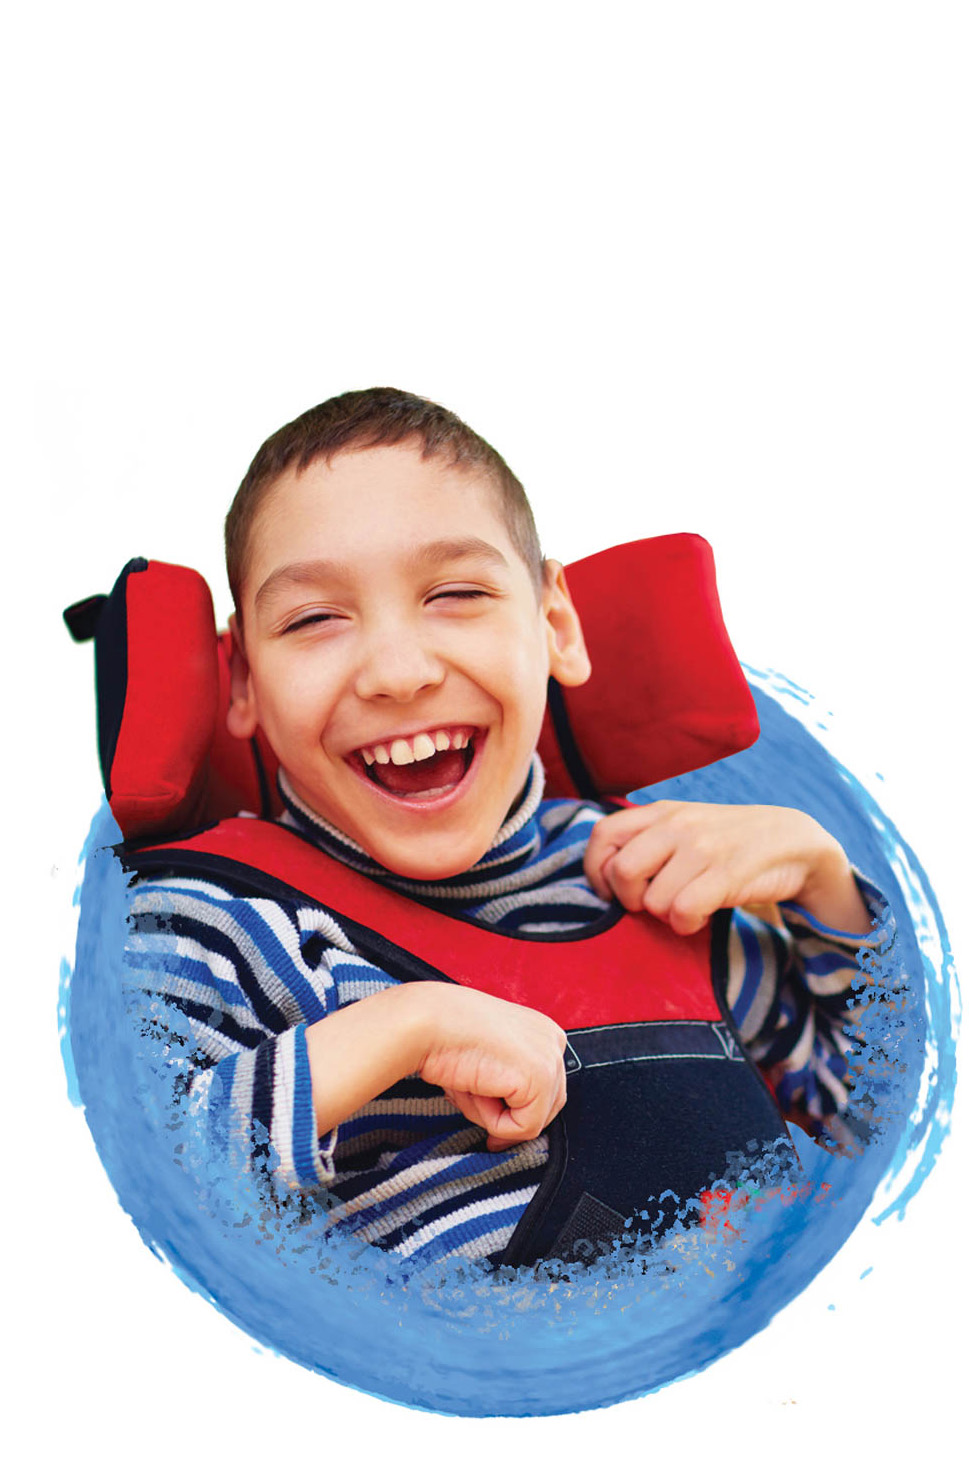 Smiling child with cerebral palsy in wheelchair